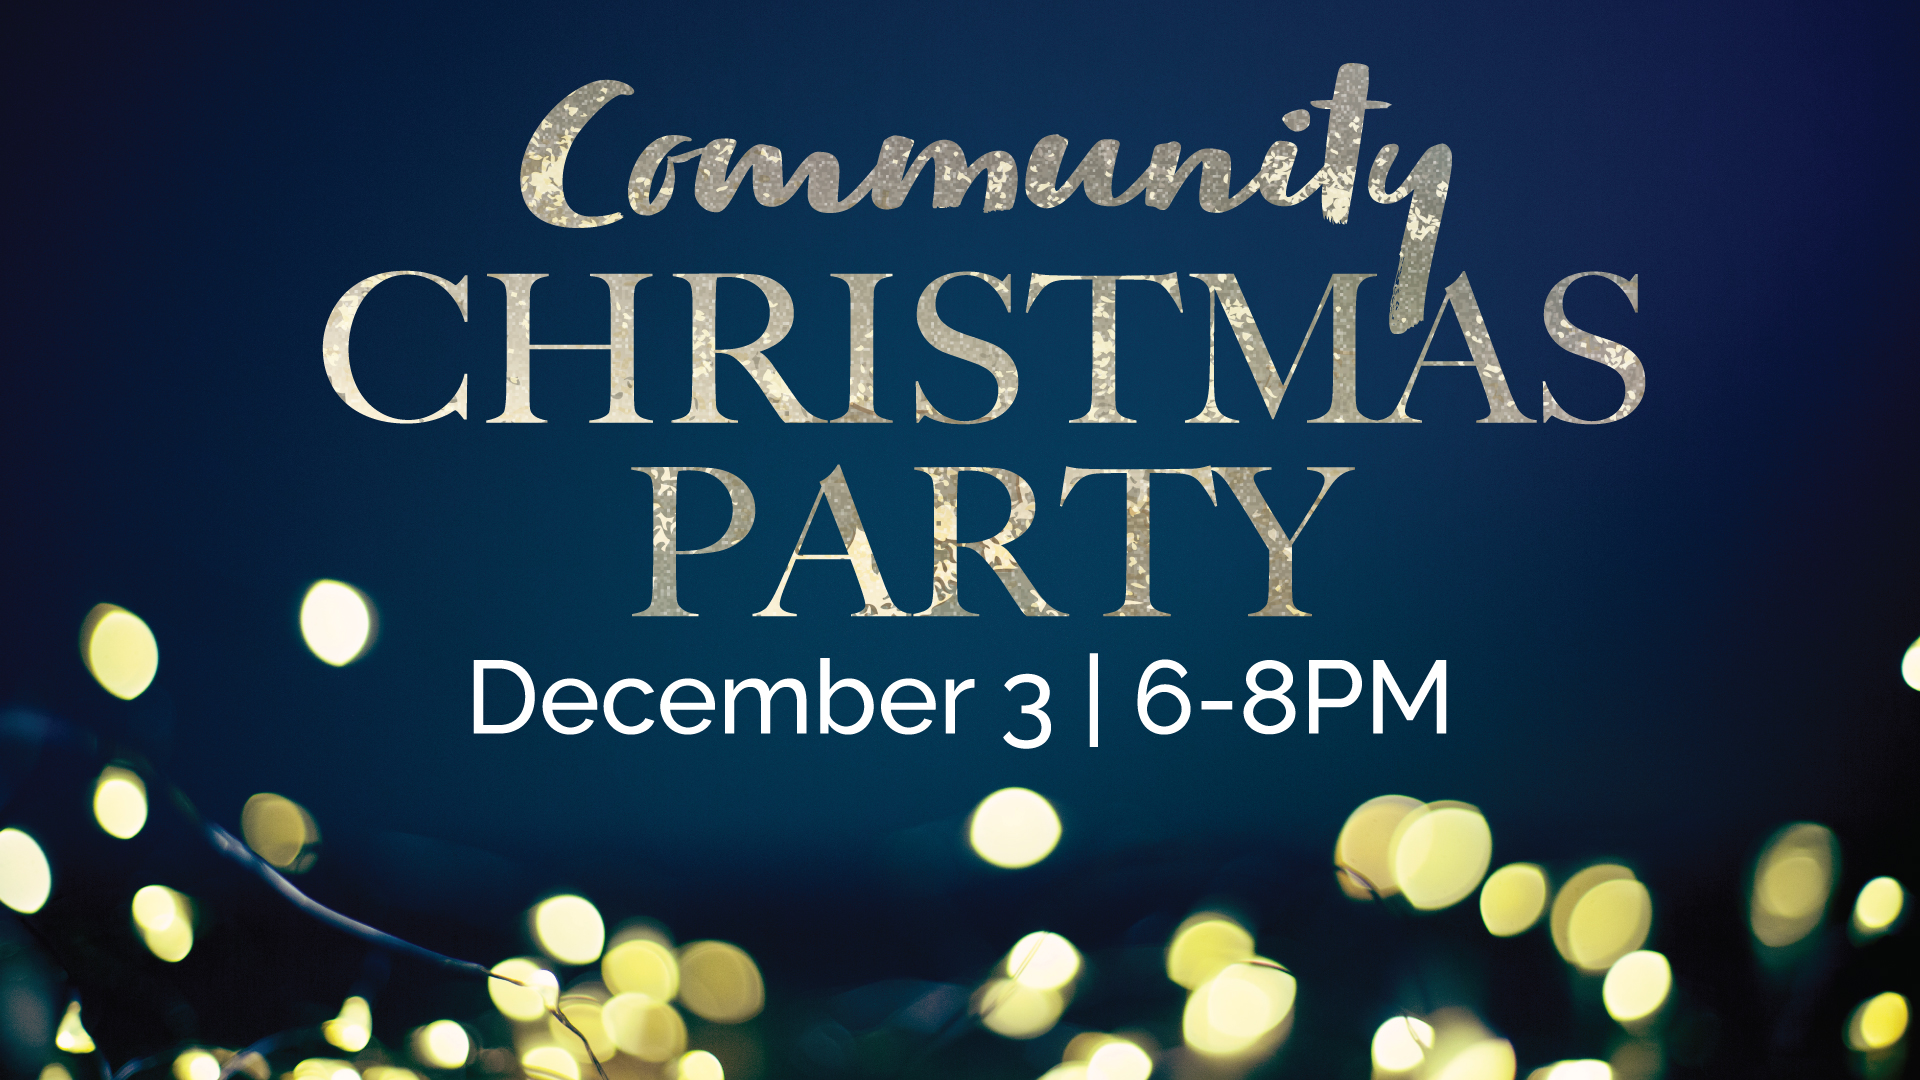 Community Christmas Party | December 3 | 6:30-8PM